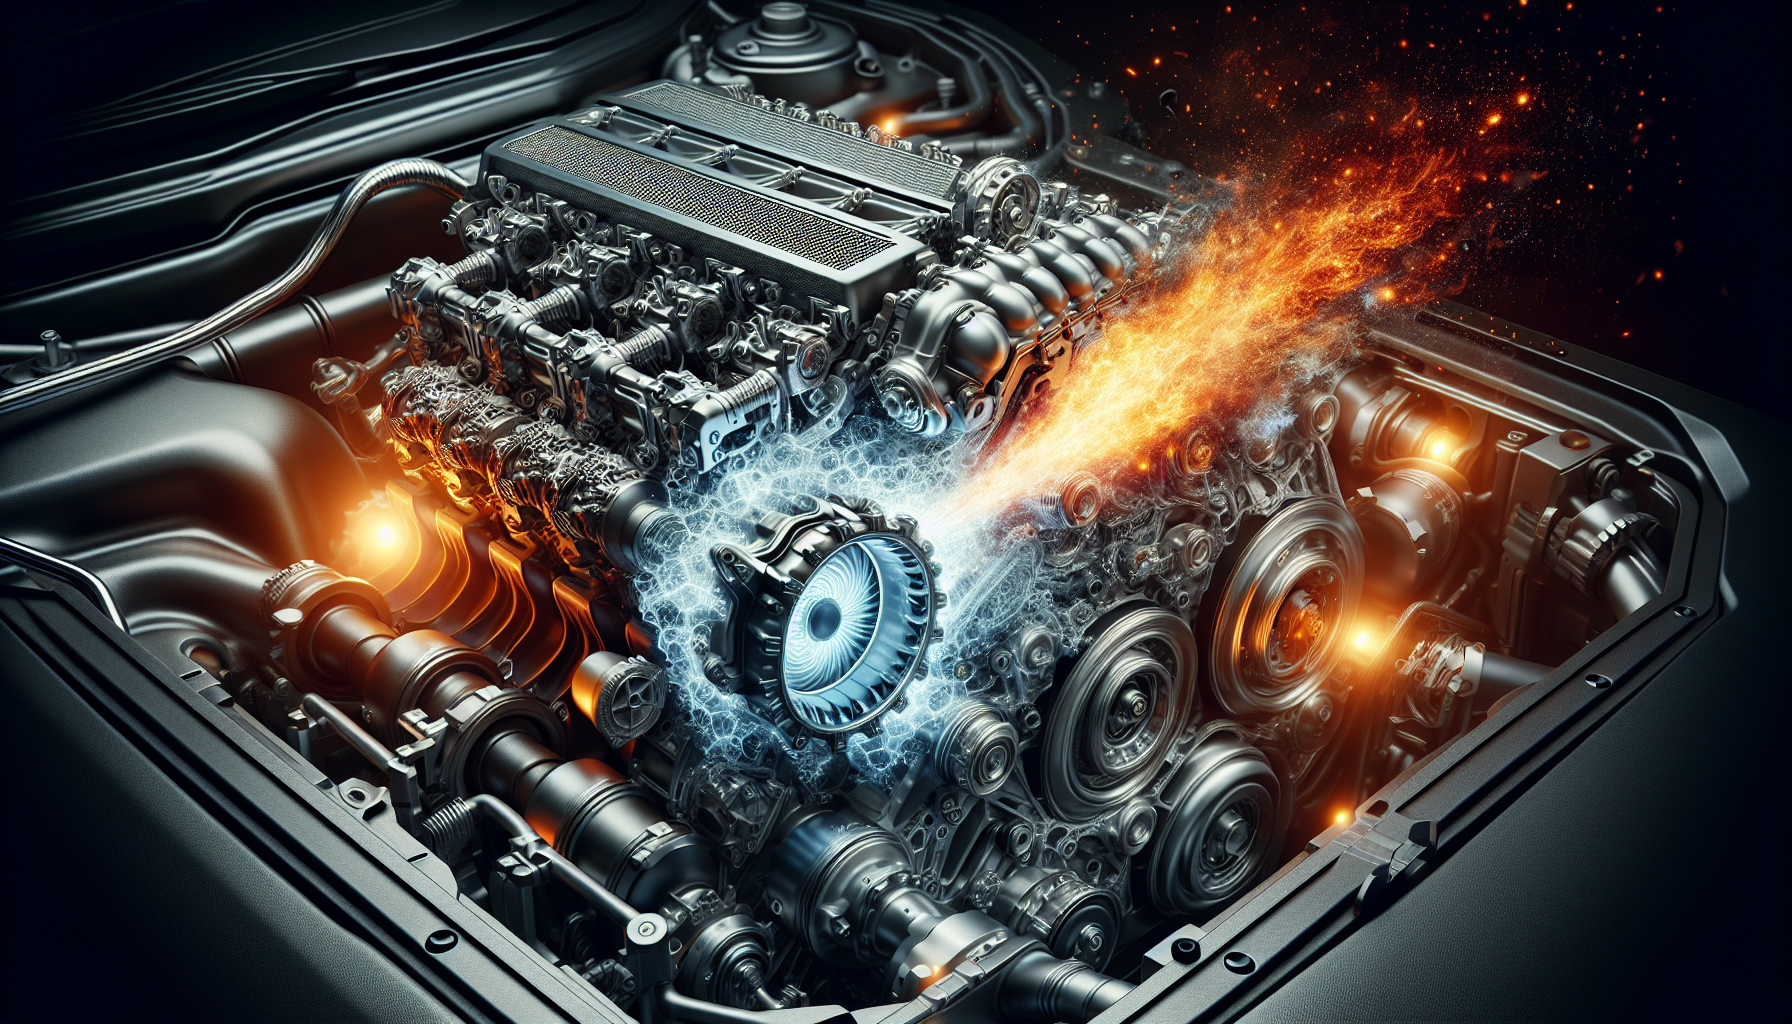 Illustration of the DPF regeneration process in a BMW engine